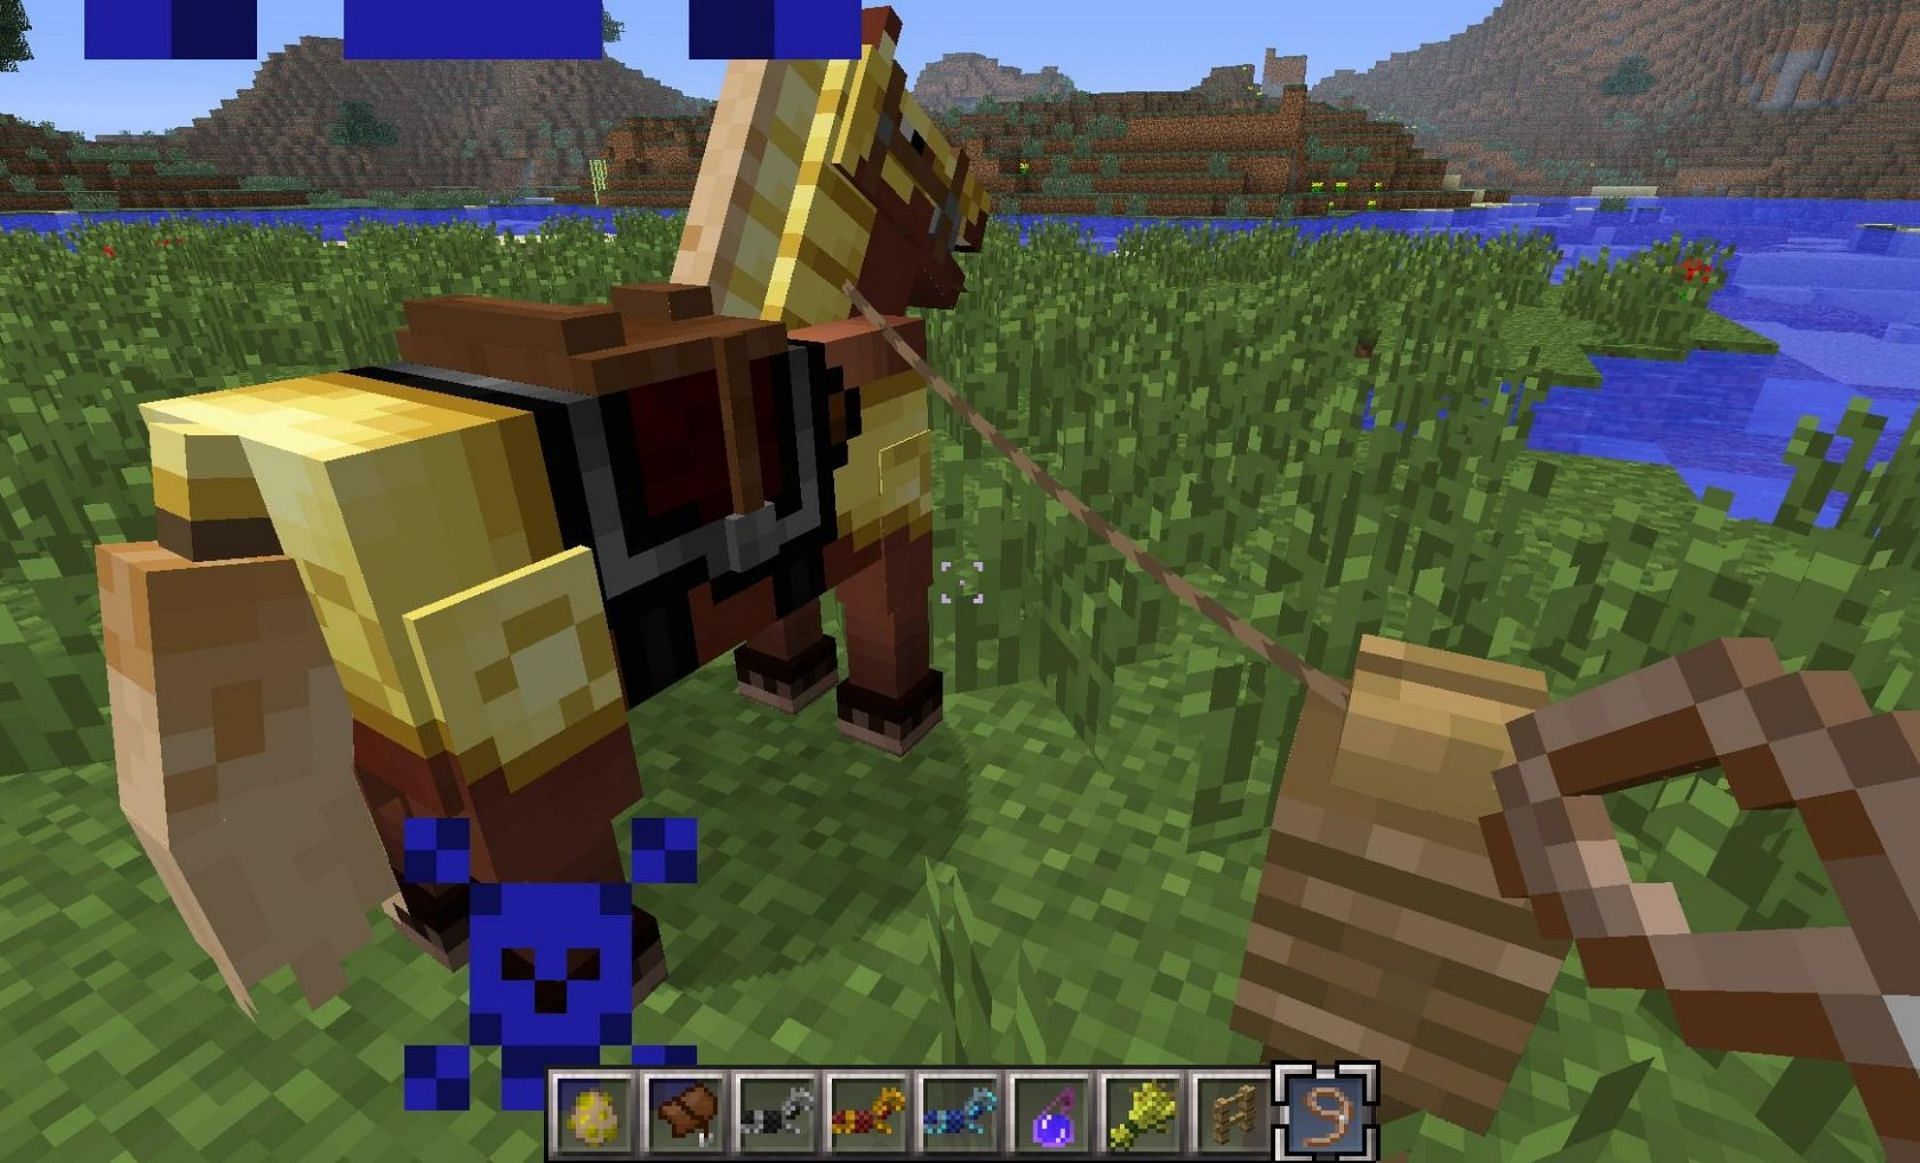 Horse on a lead (Image via Minecraft Wiki)